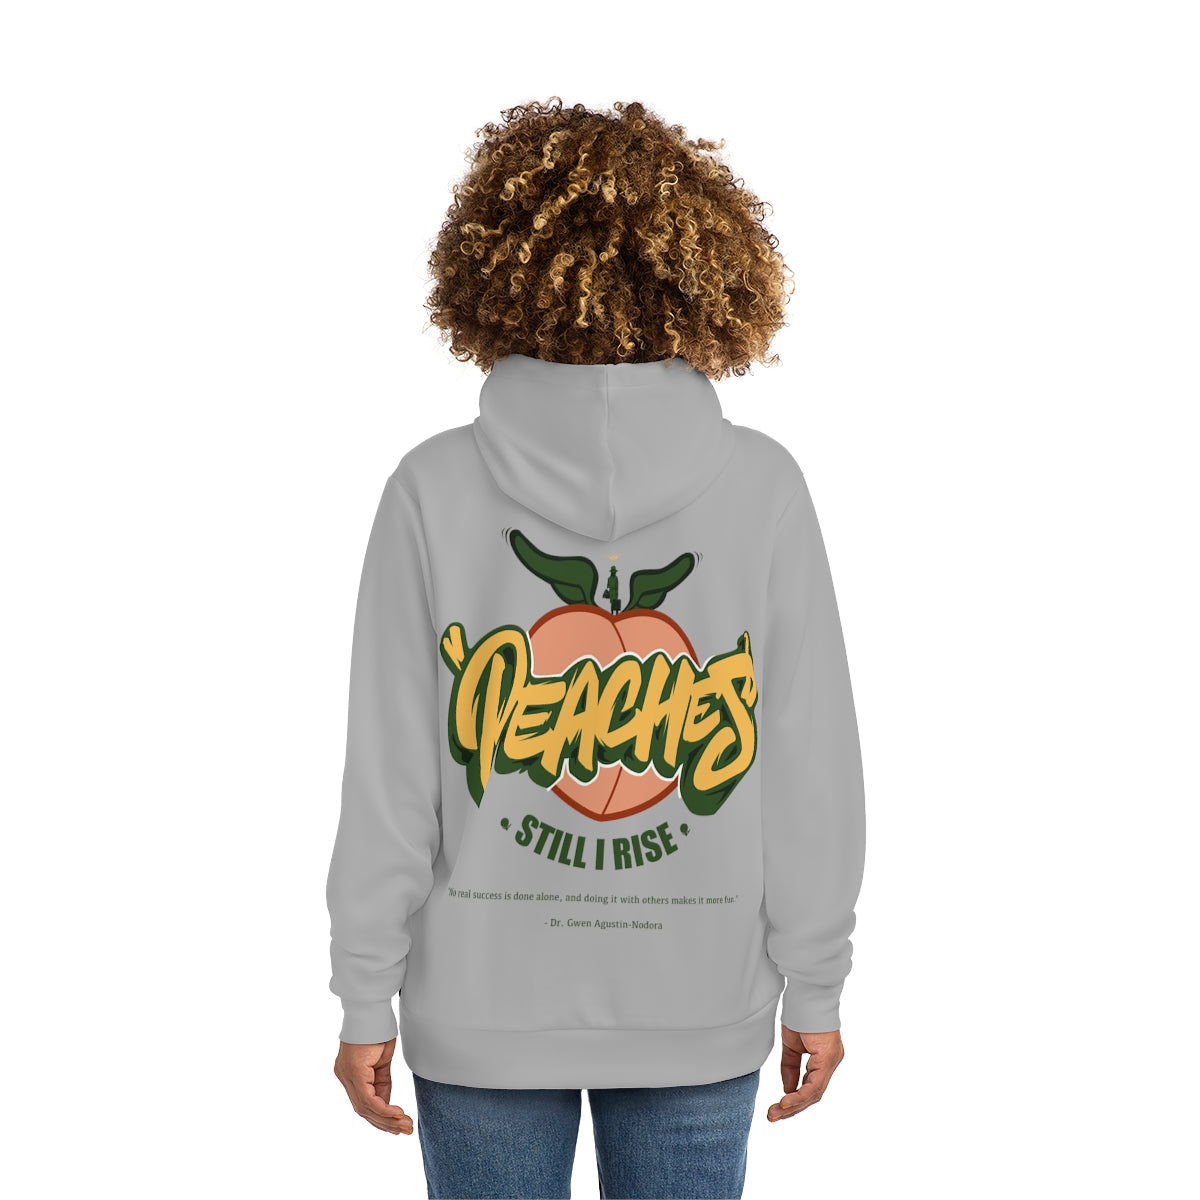 Peaches "Still I Rise" Gray Pullover Hoodie